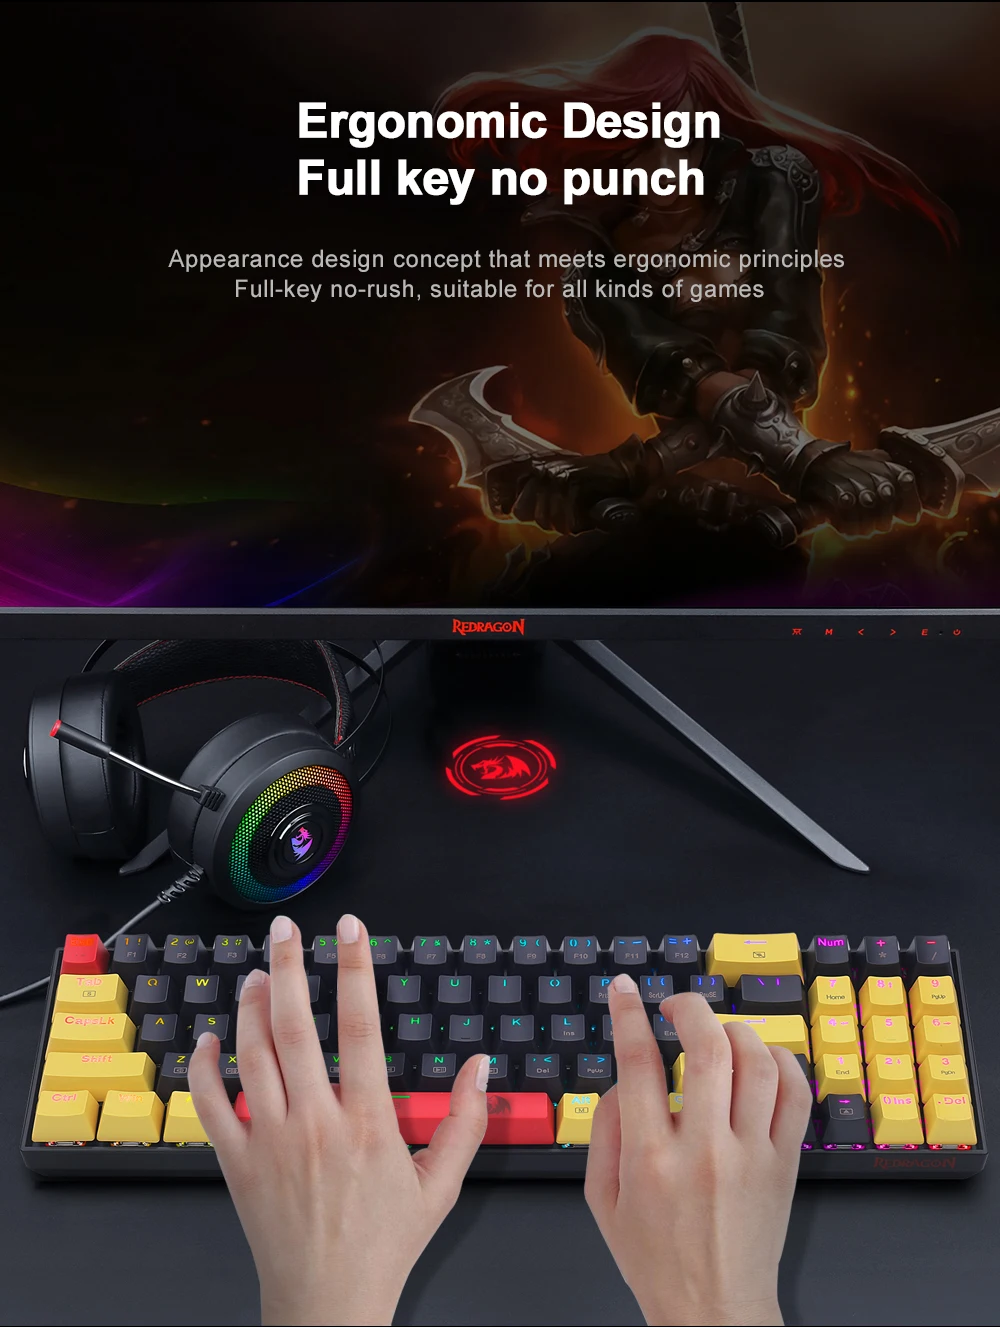 “unleash your gaming potential with k688 rgb mini mechanical keyboard – 78 keys, blue/red switch, detachable usb cable for pc and laptop gaming